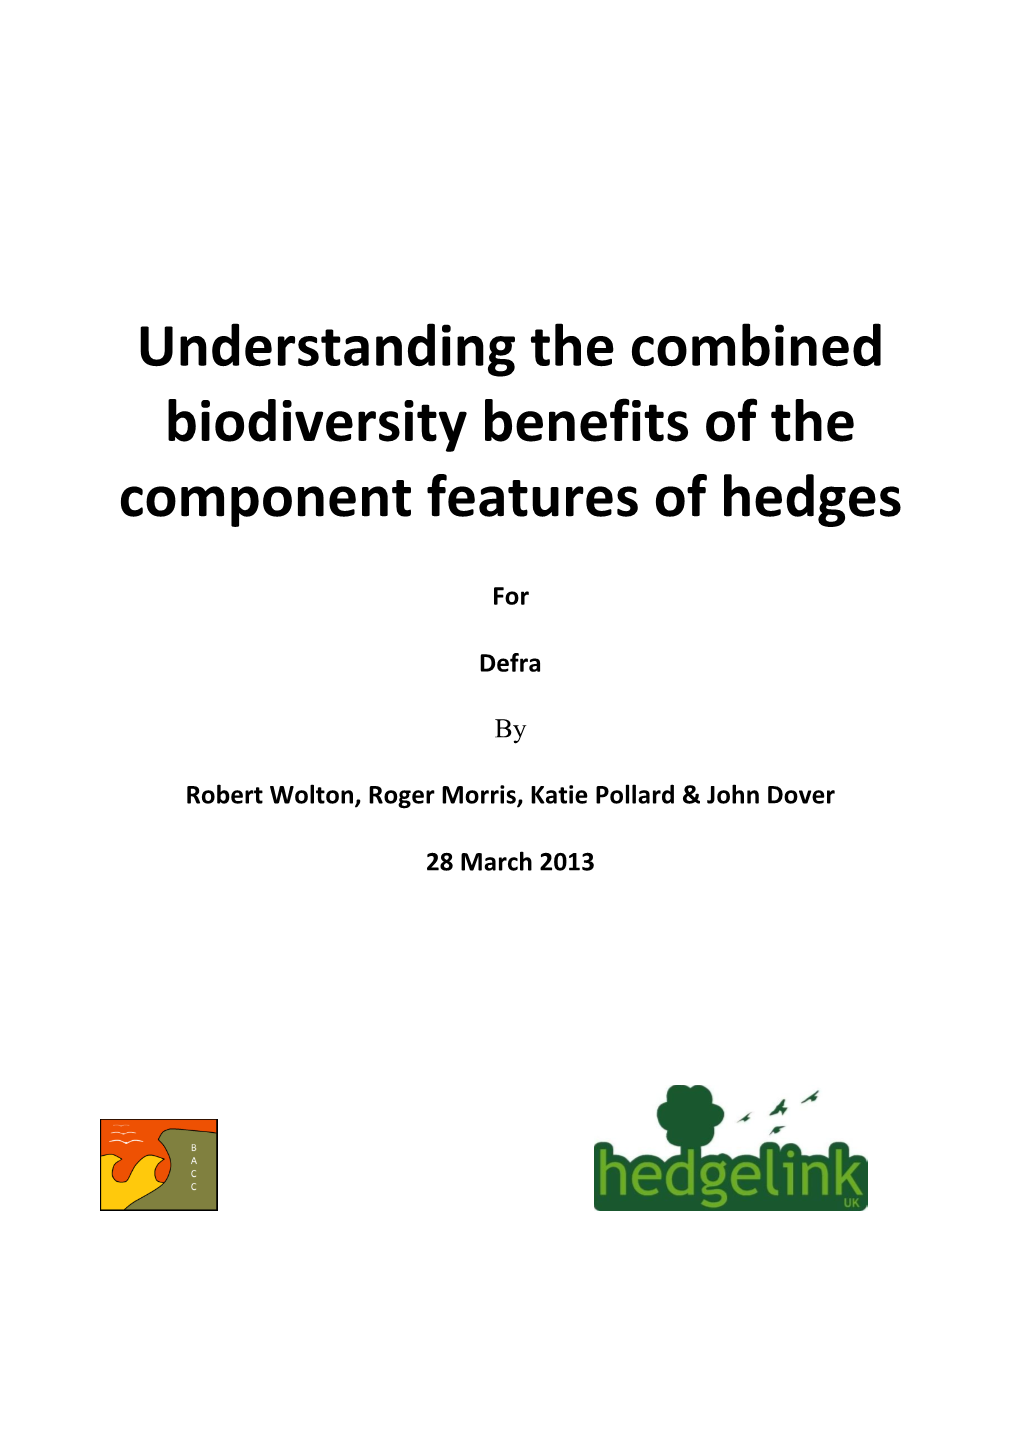 Understanding the Combined Biodiversity Benefits of the Component Features of Hedges